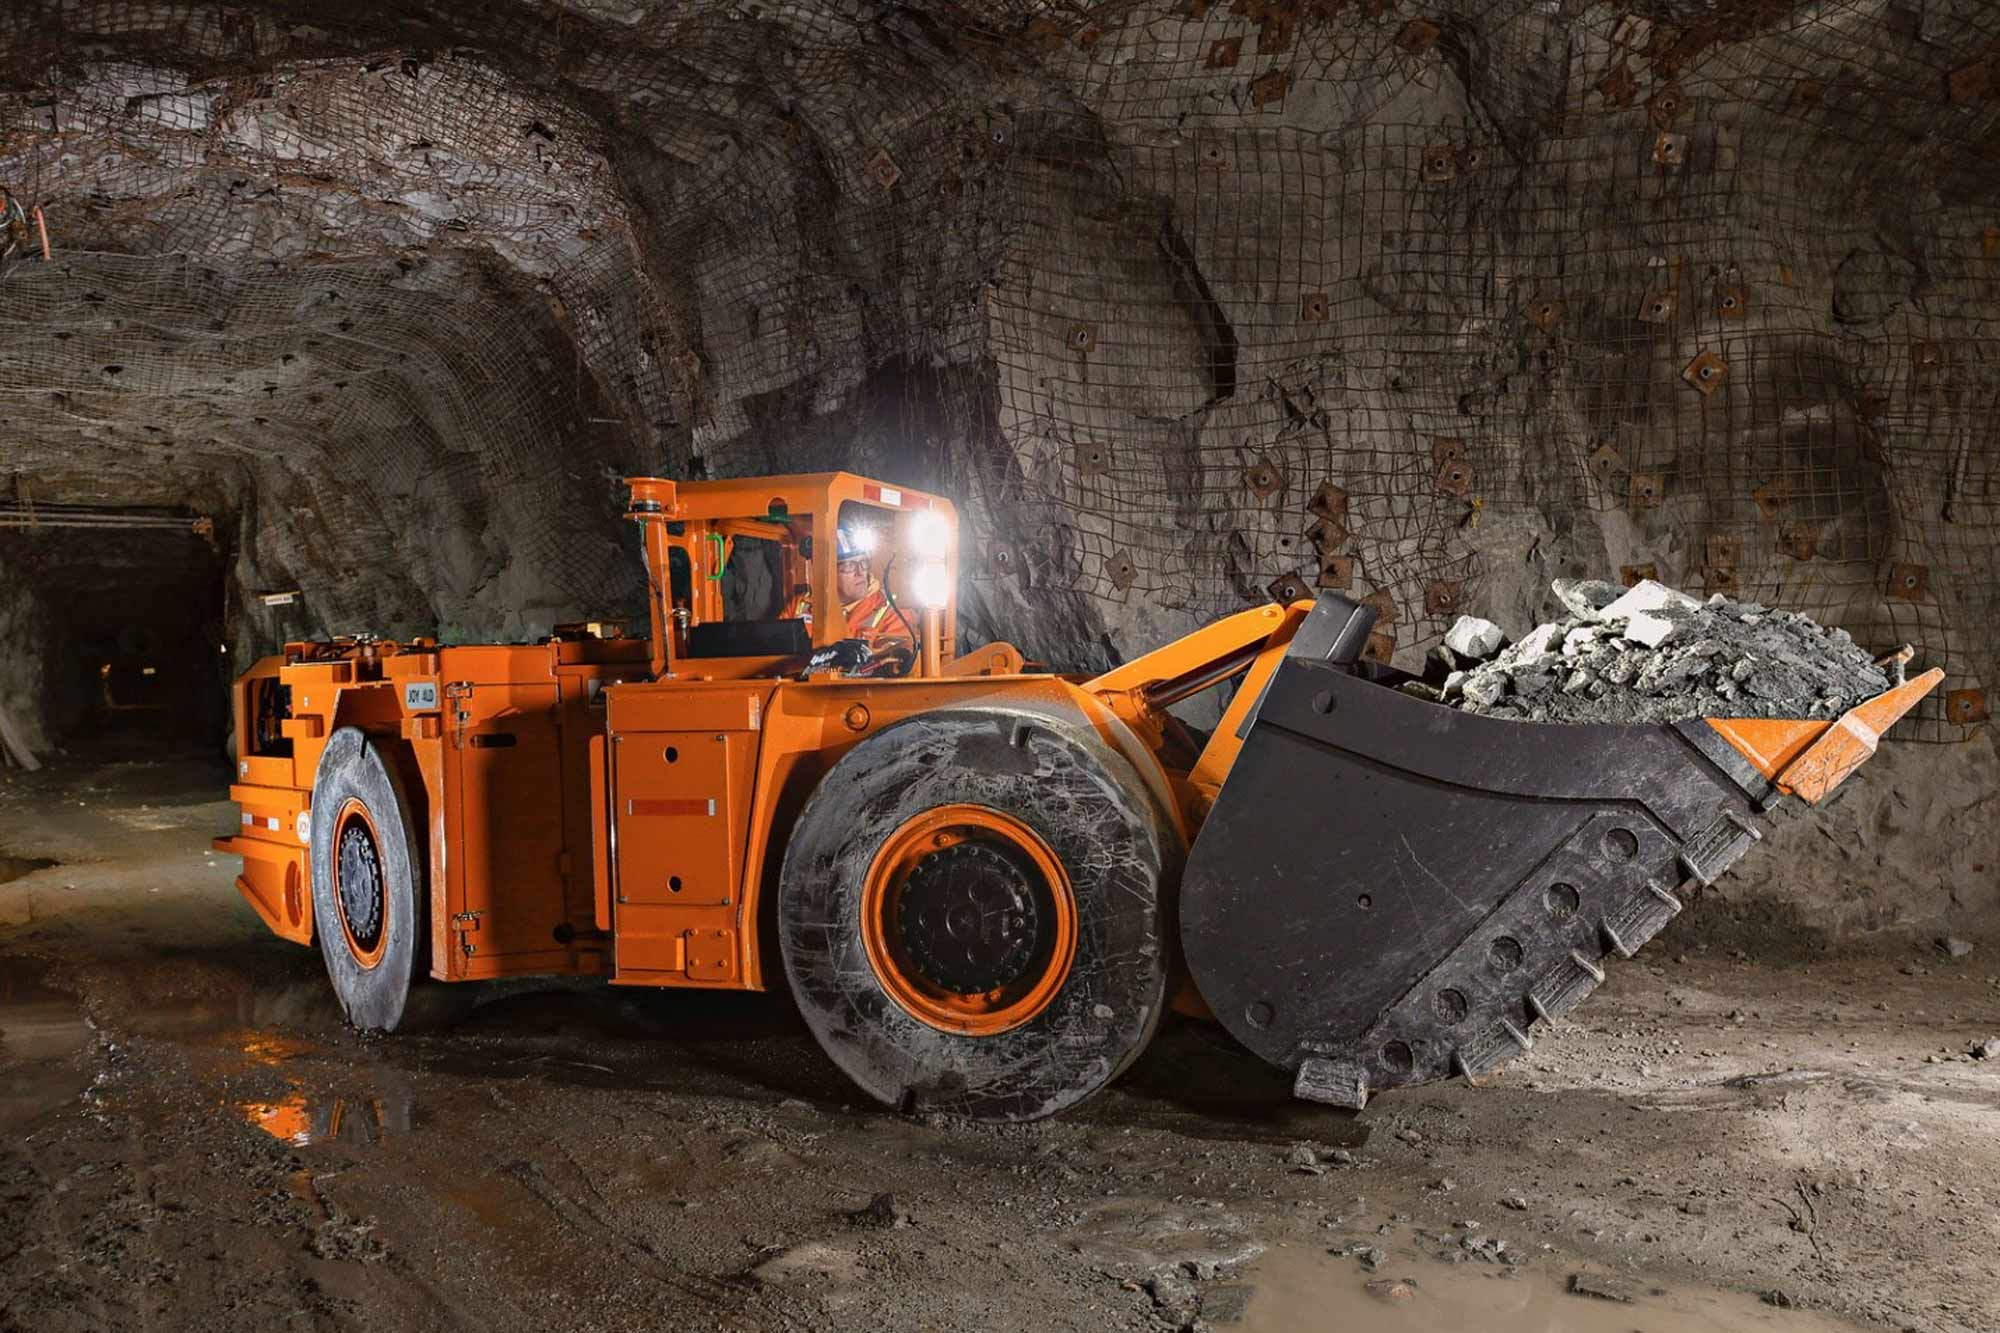 How to select equipment for underground mining